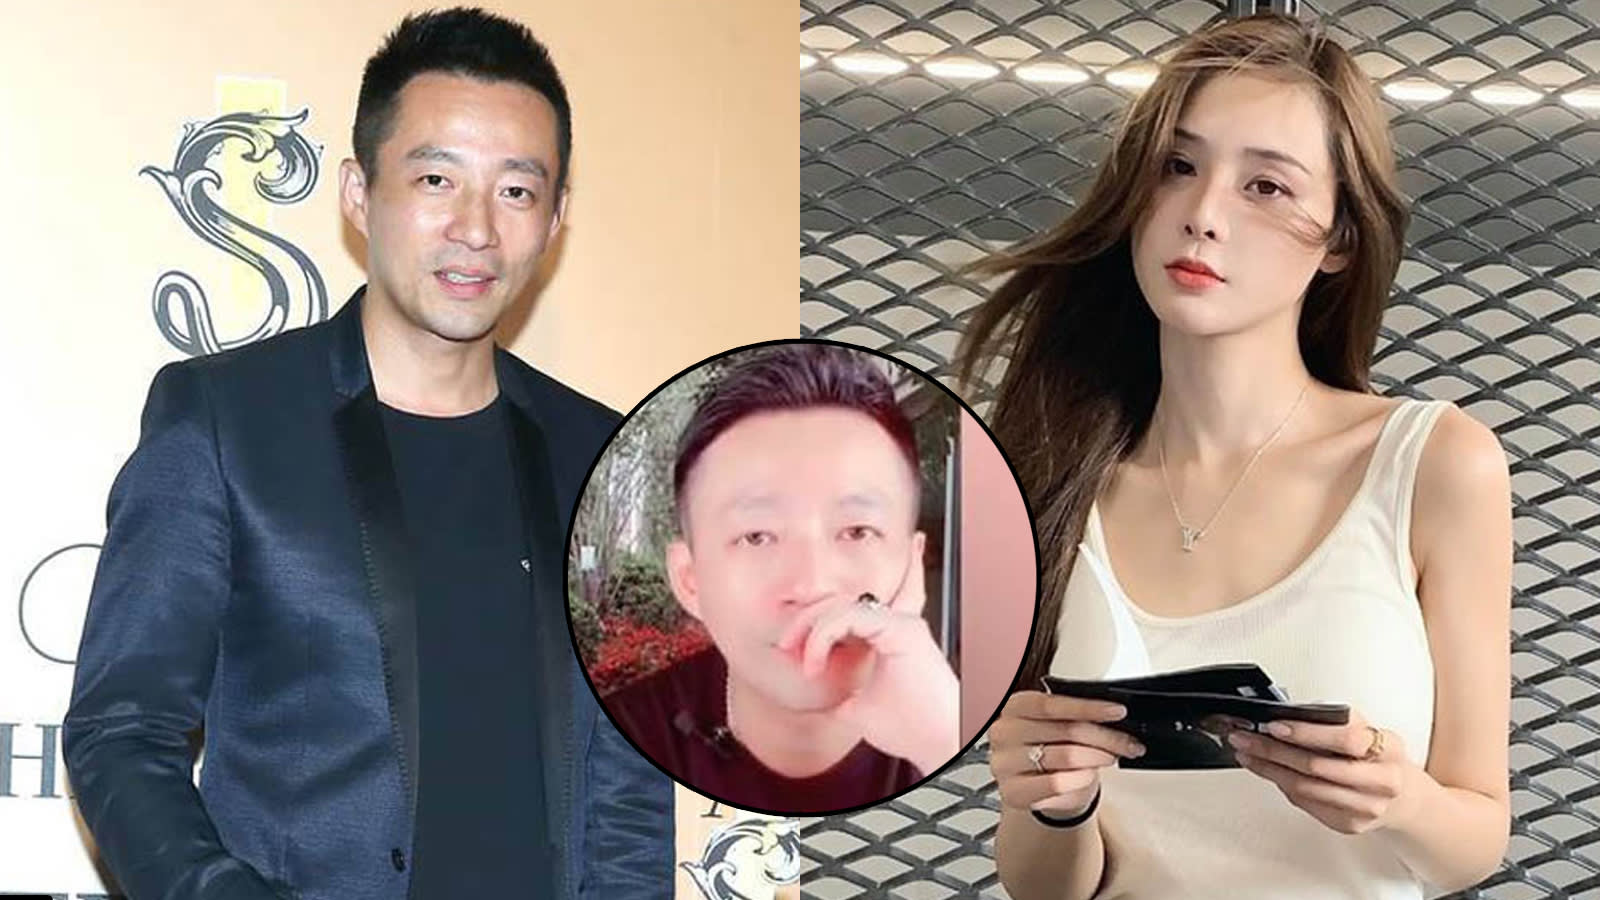 Wang Xiaofei, 40, Rumoured To Have Married His 26-Year-Old Alleged Girlfriend 4 Months After Divorcing Barbie Hsu - 8days